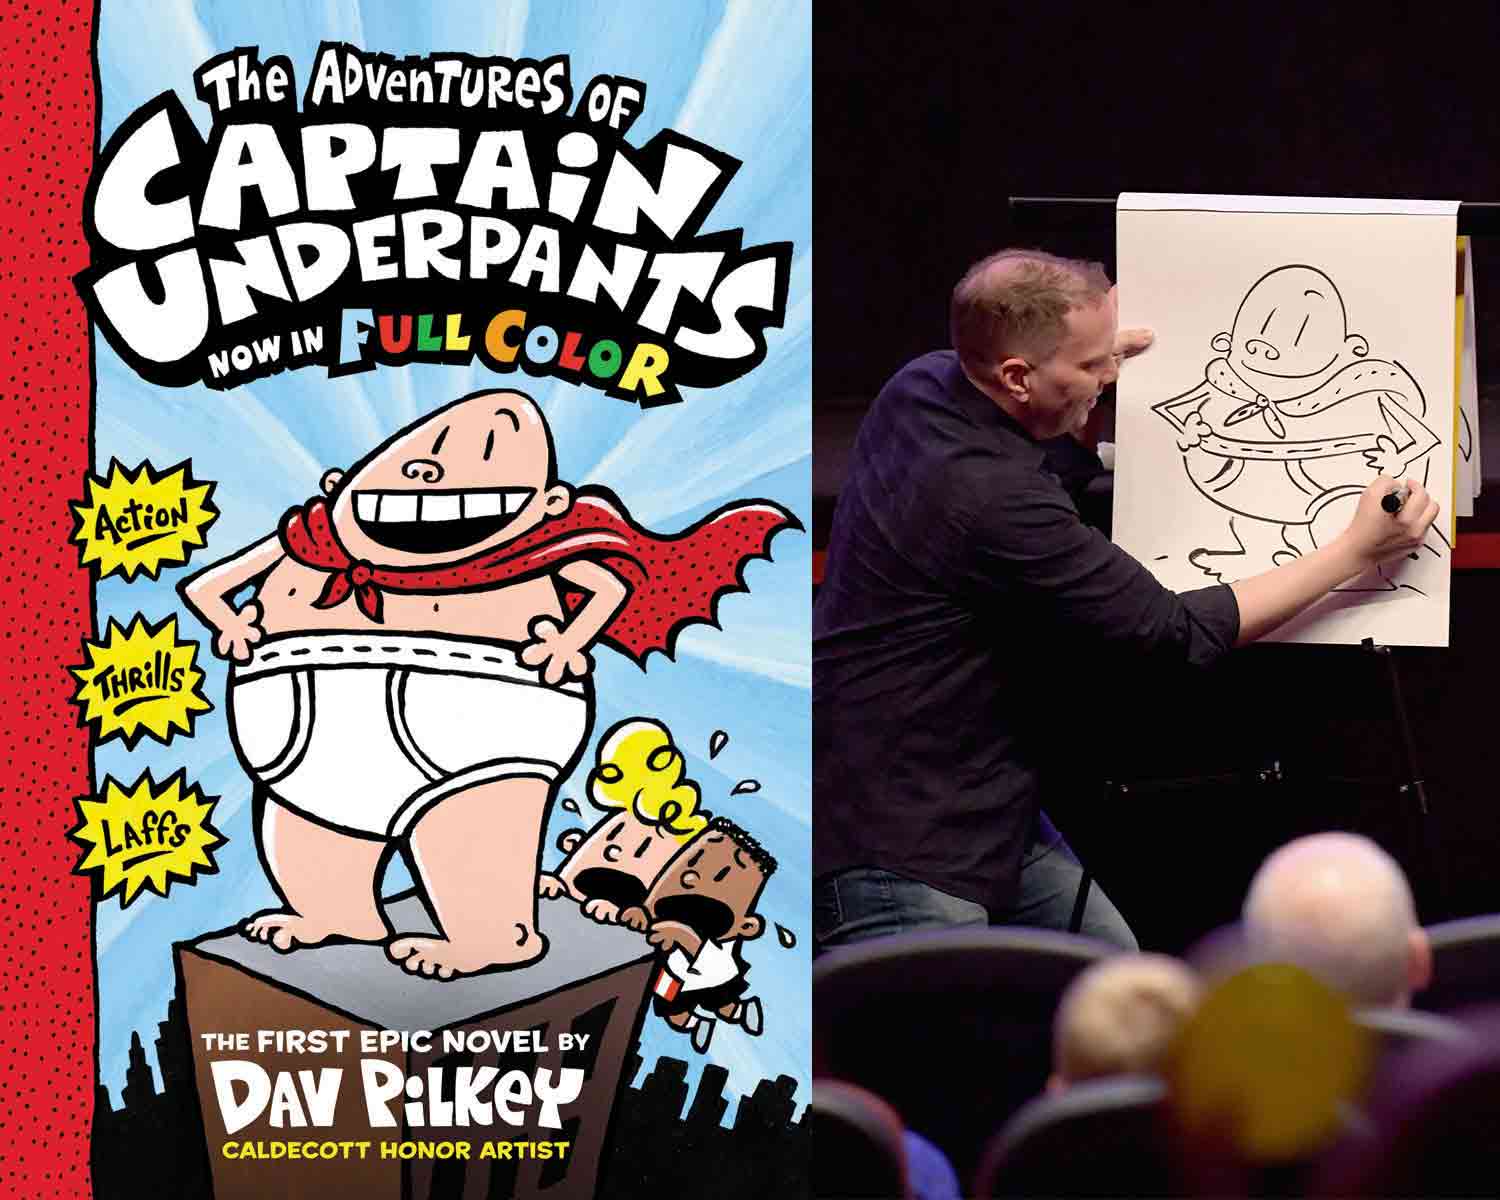 The cover of The Adventures of Captain Underpants next to a photo of Pilkey illustrating Captain Underpants on a stage.